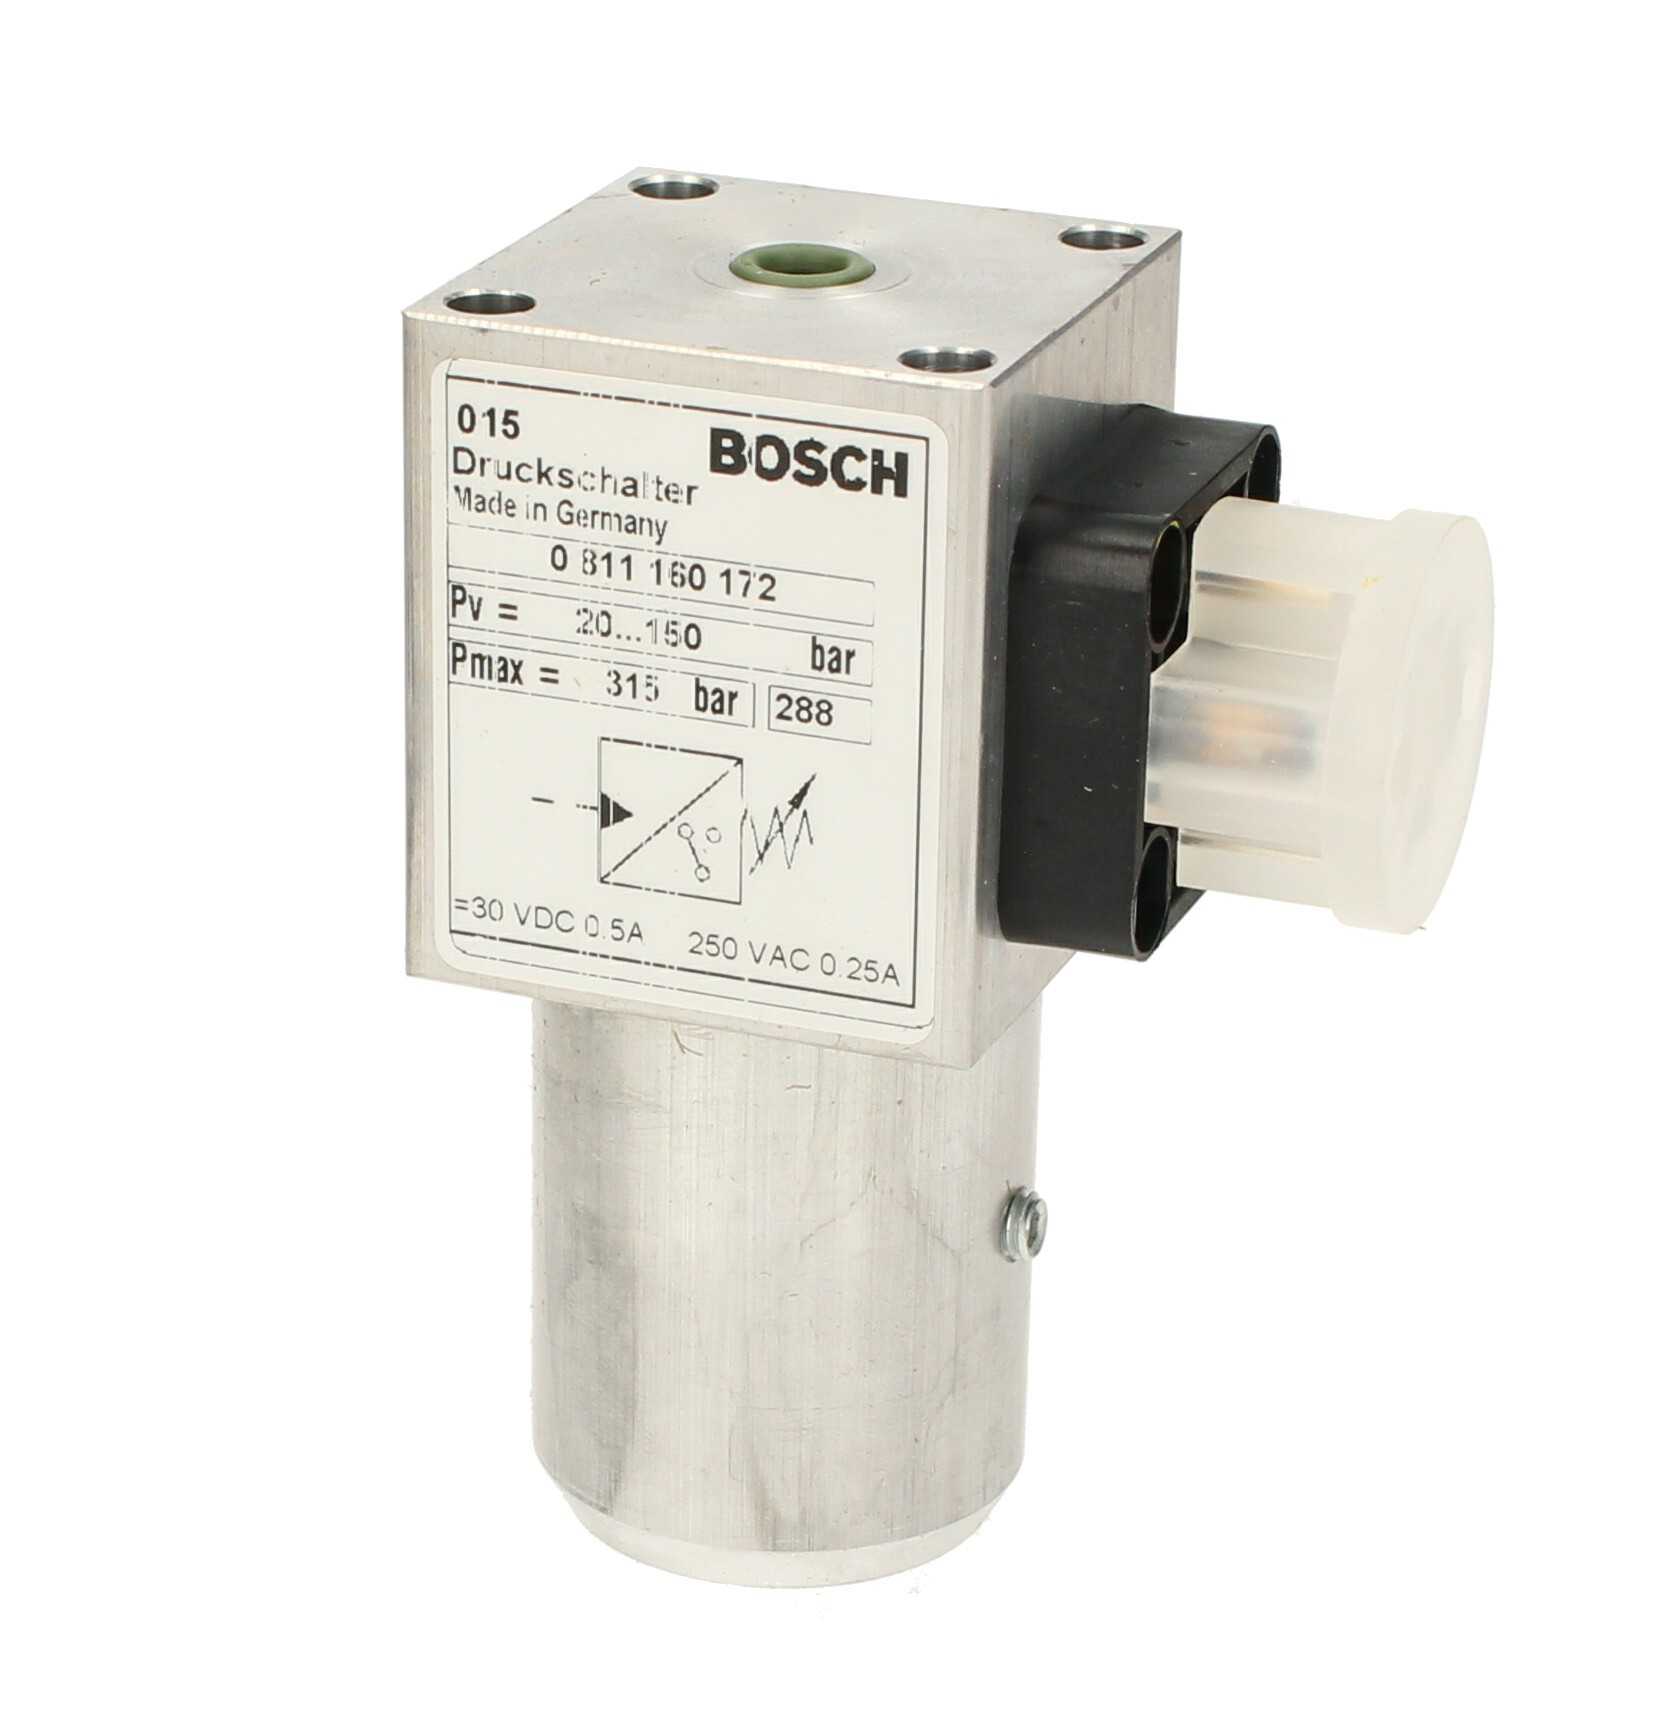 0811160171 PRESSURE SWITCH, 0811160172 BOSCH PRODUCT DISCONTINUED BY THE MANUFACTURER